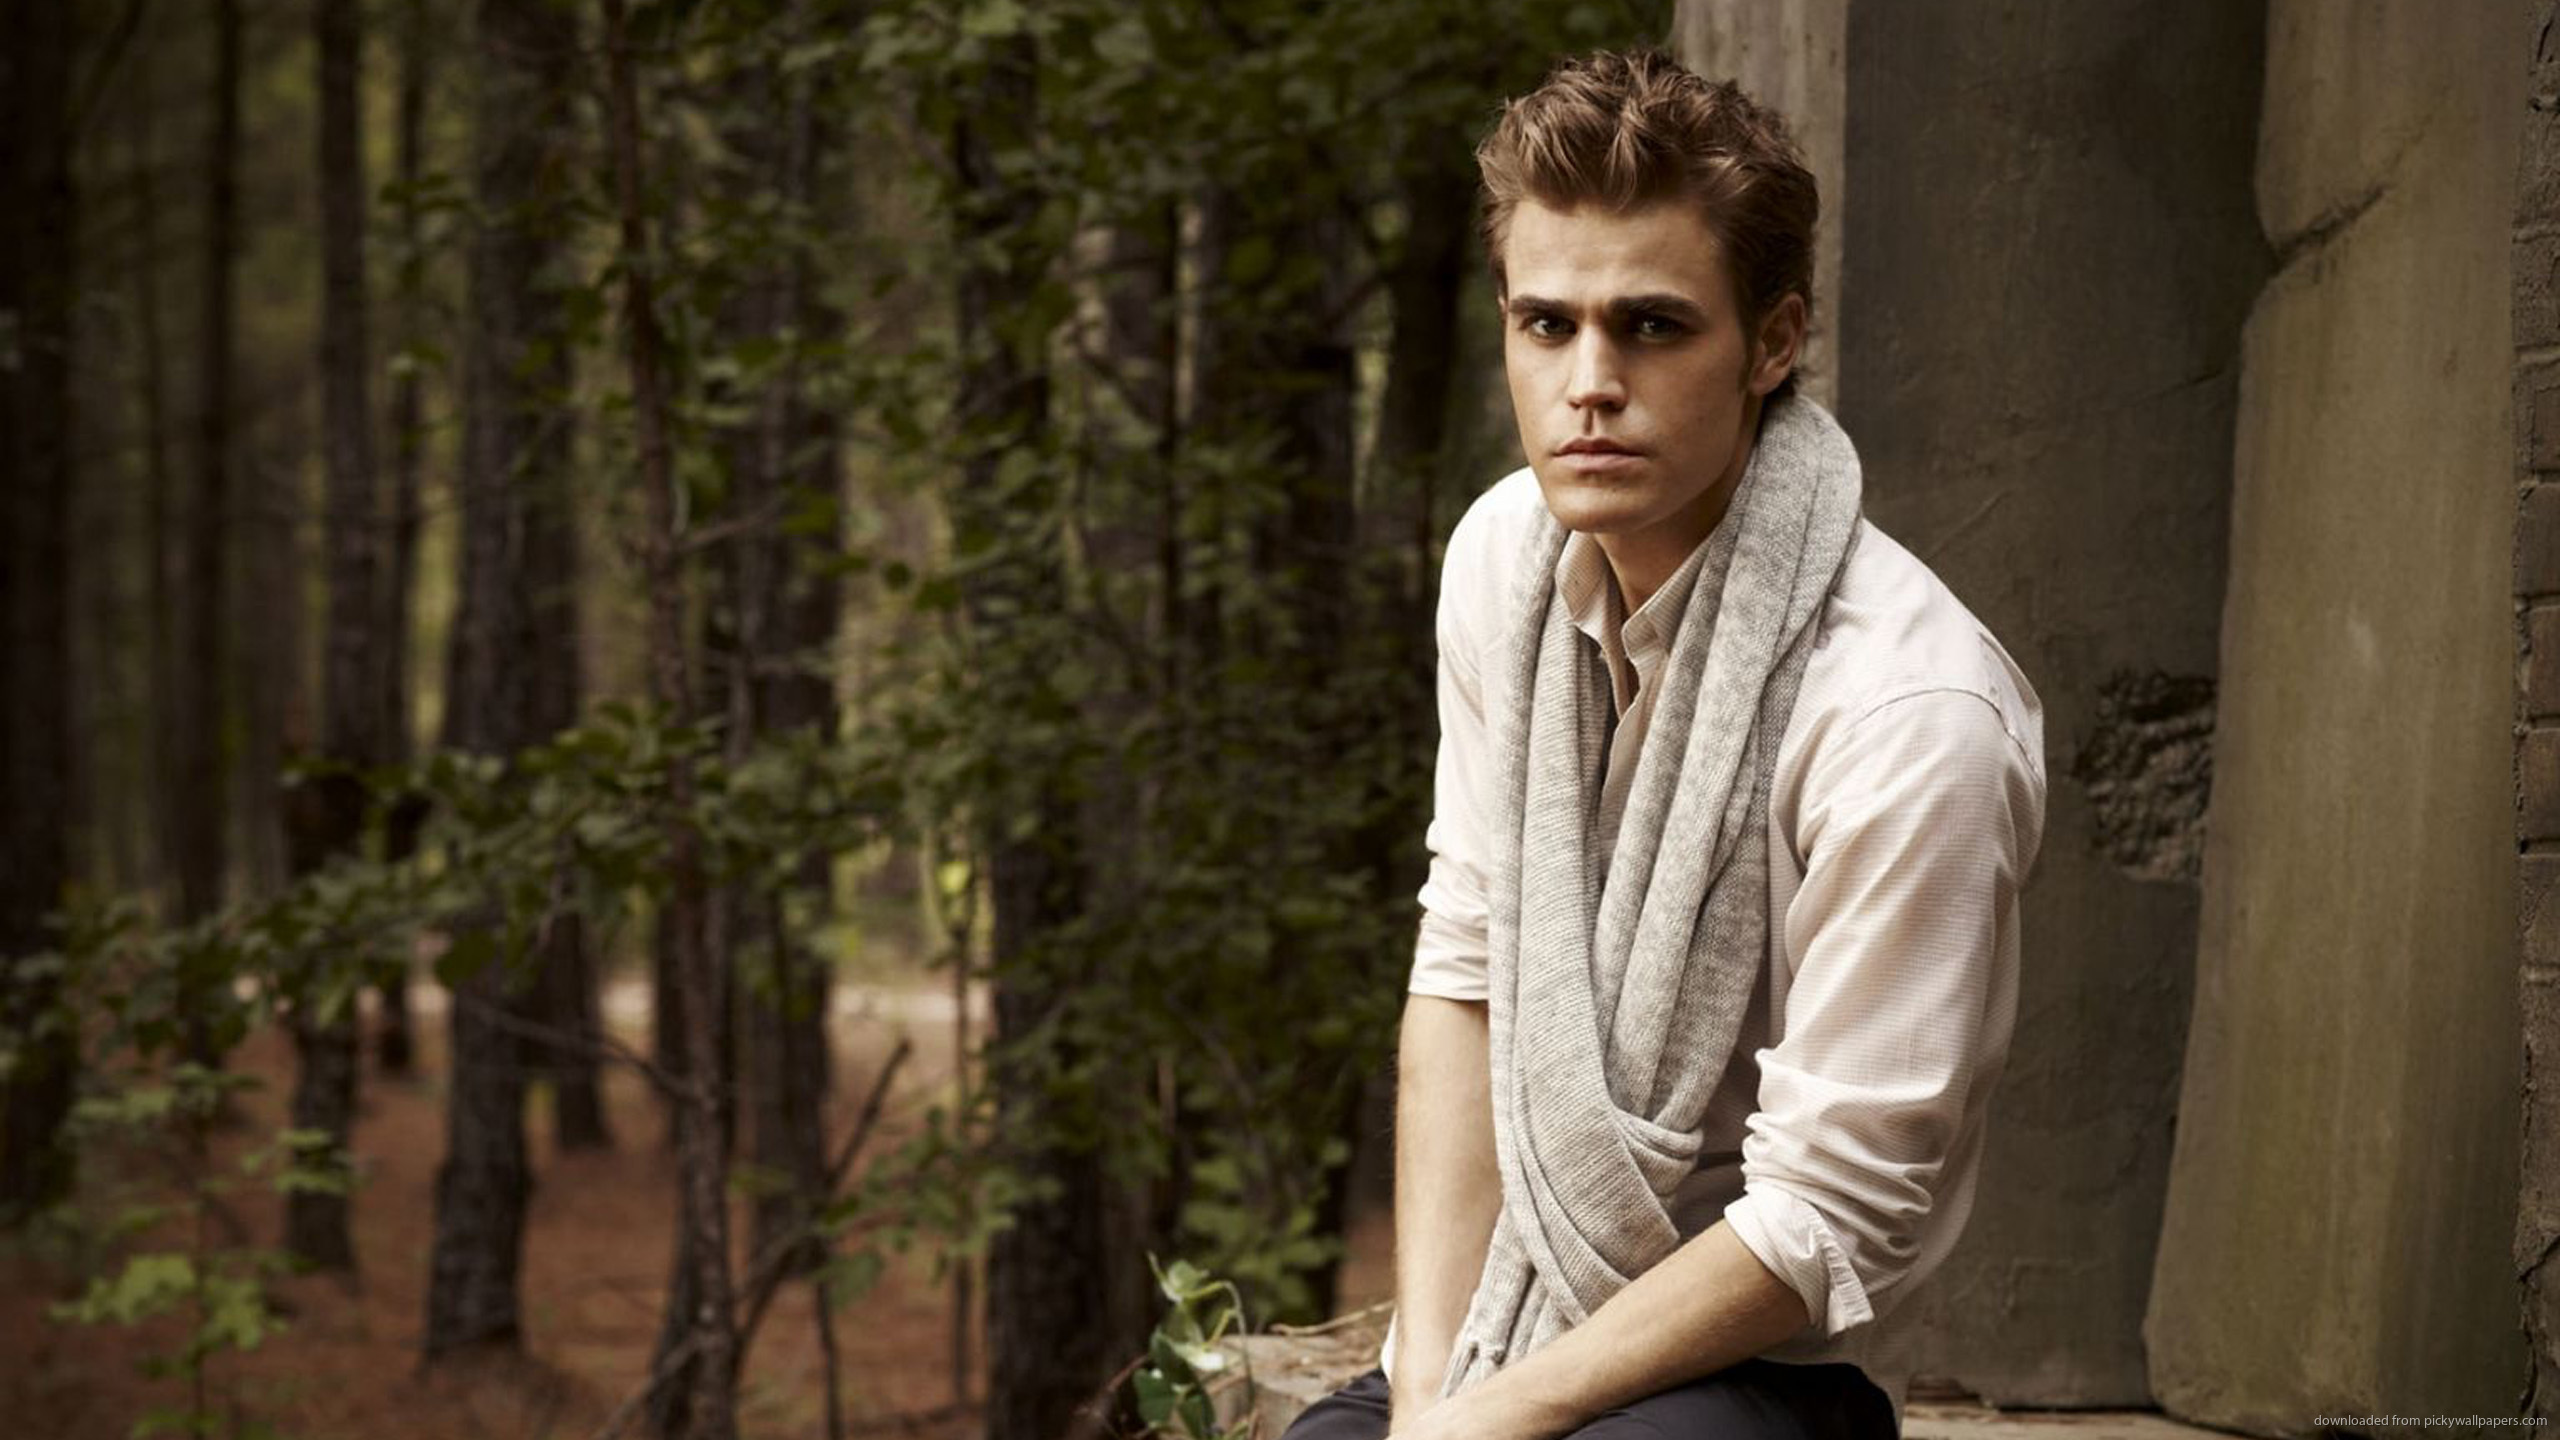 Paul Wesley Wallpaper Image Photos Pictures Background